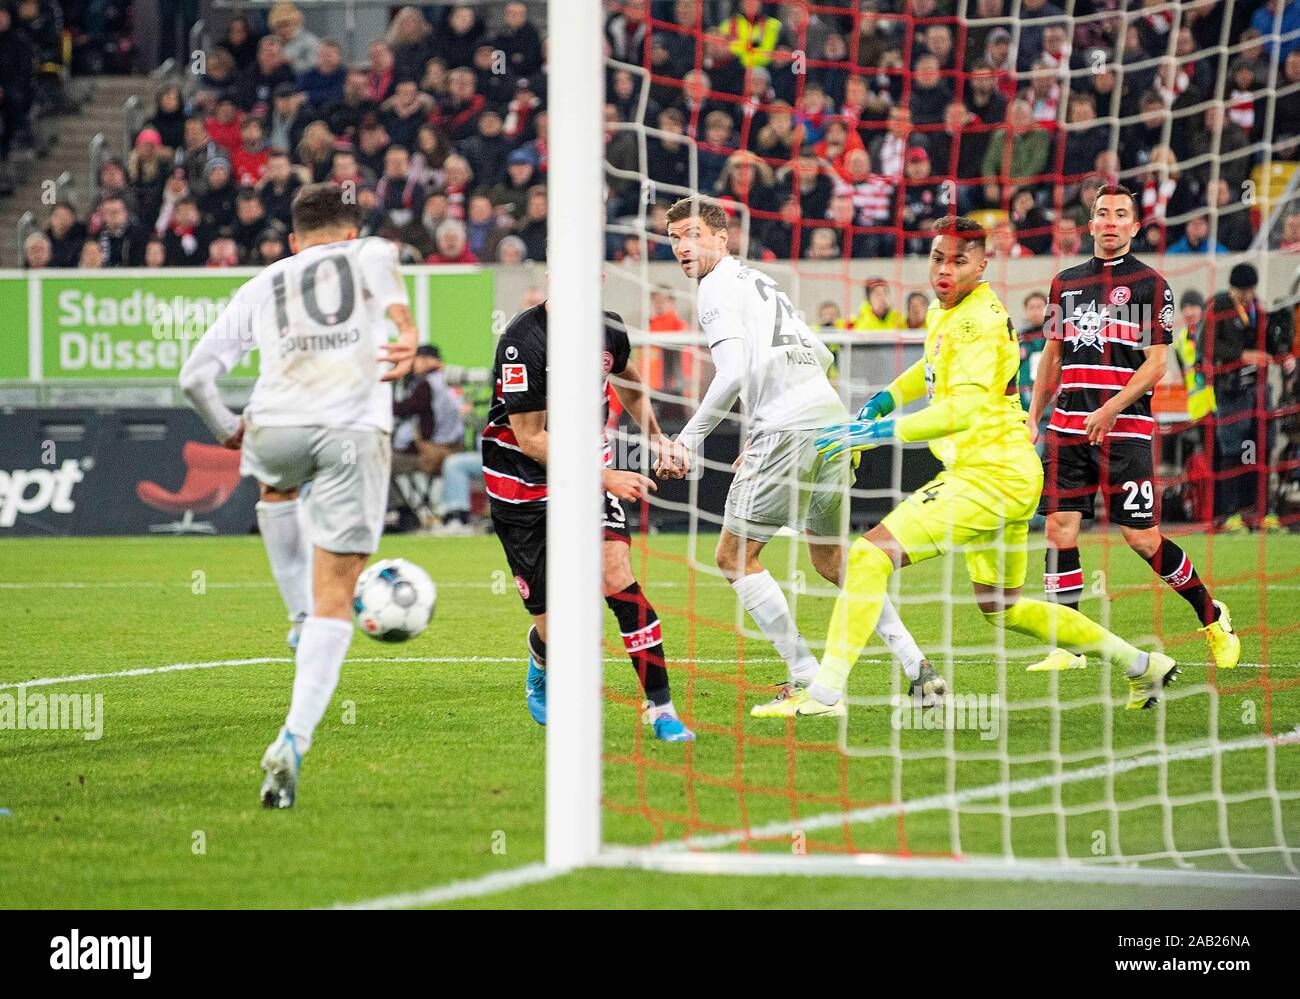 Philippe COUTINHO l. (M) scores the goal for 0: 4 versus goalkeeper Zackary STEFFEN (D), Action, Football 1. Bundesliga, 12.matchday, Fortuna Dusseldorf (D) - FC Bayern Munich (M), on 23/11/2019 in Duesseldorf/Germany, ¬ | usage worldwide Stock Photo